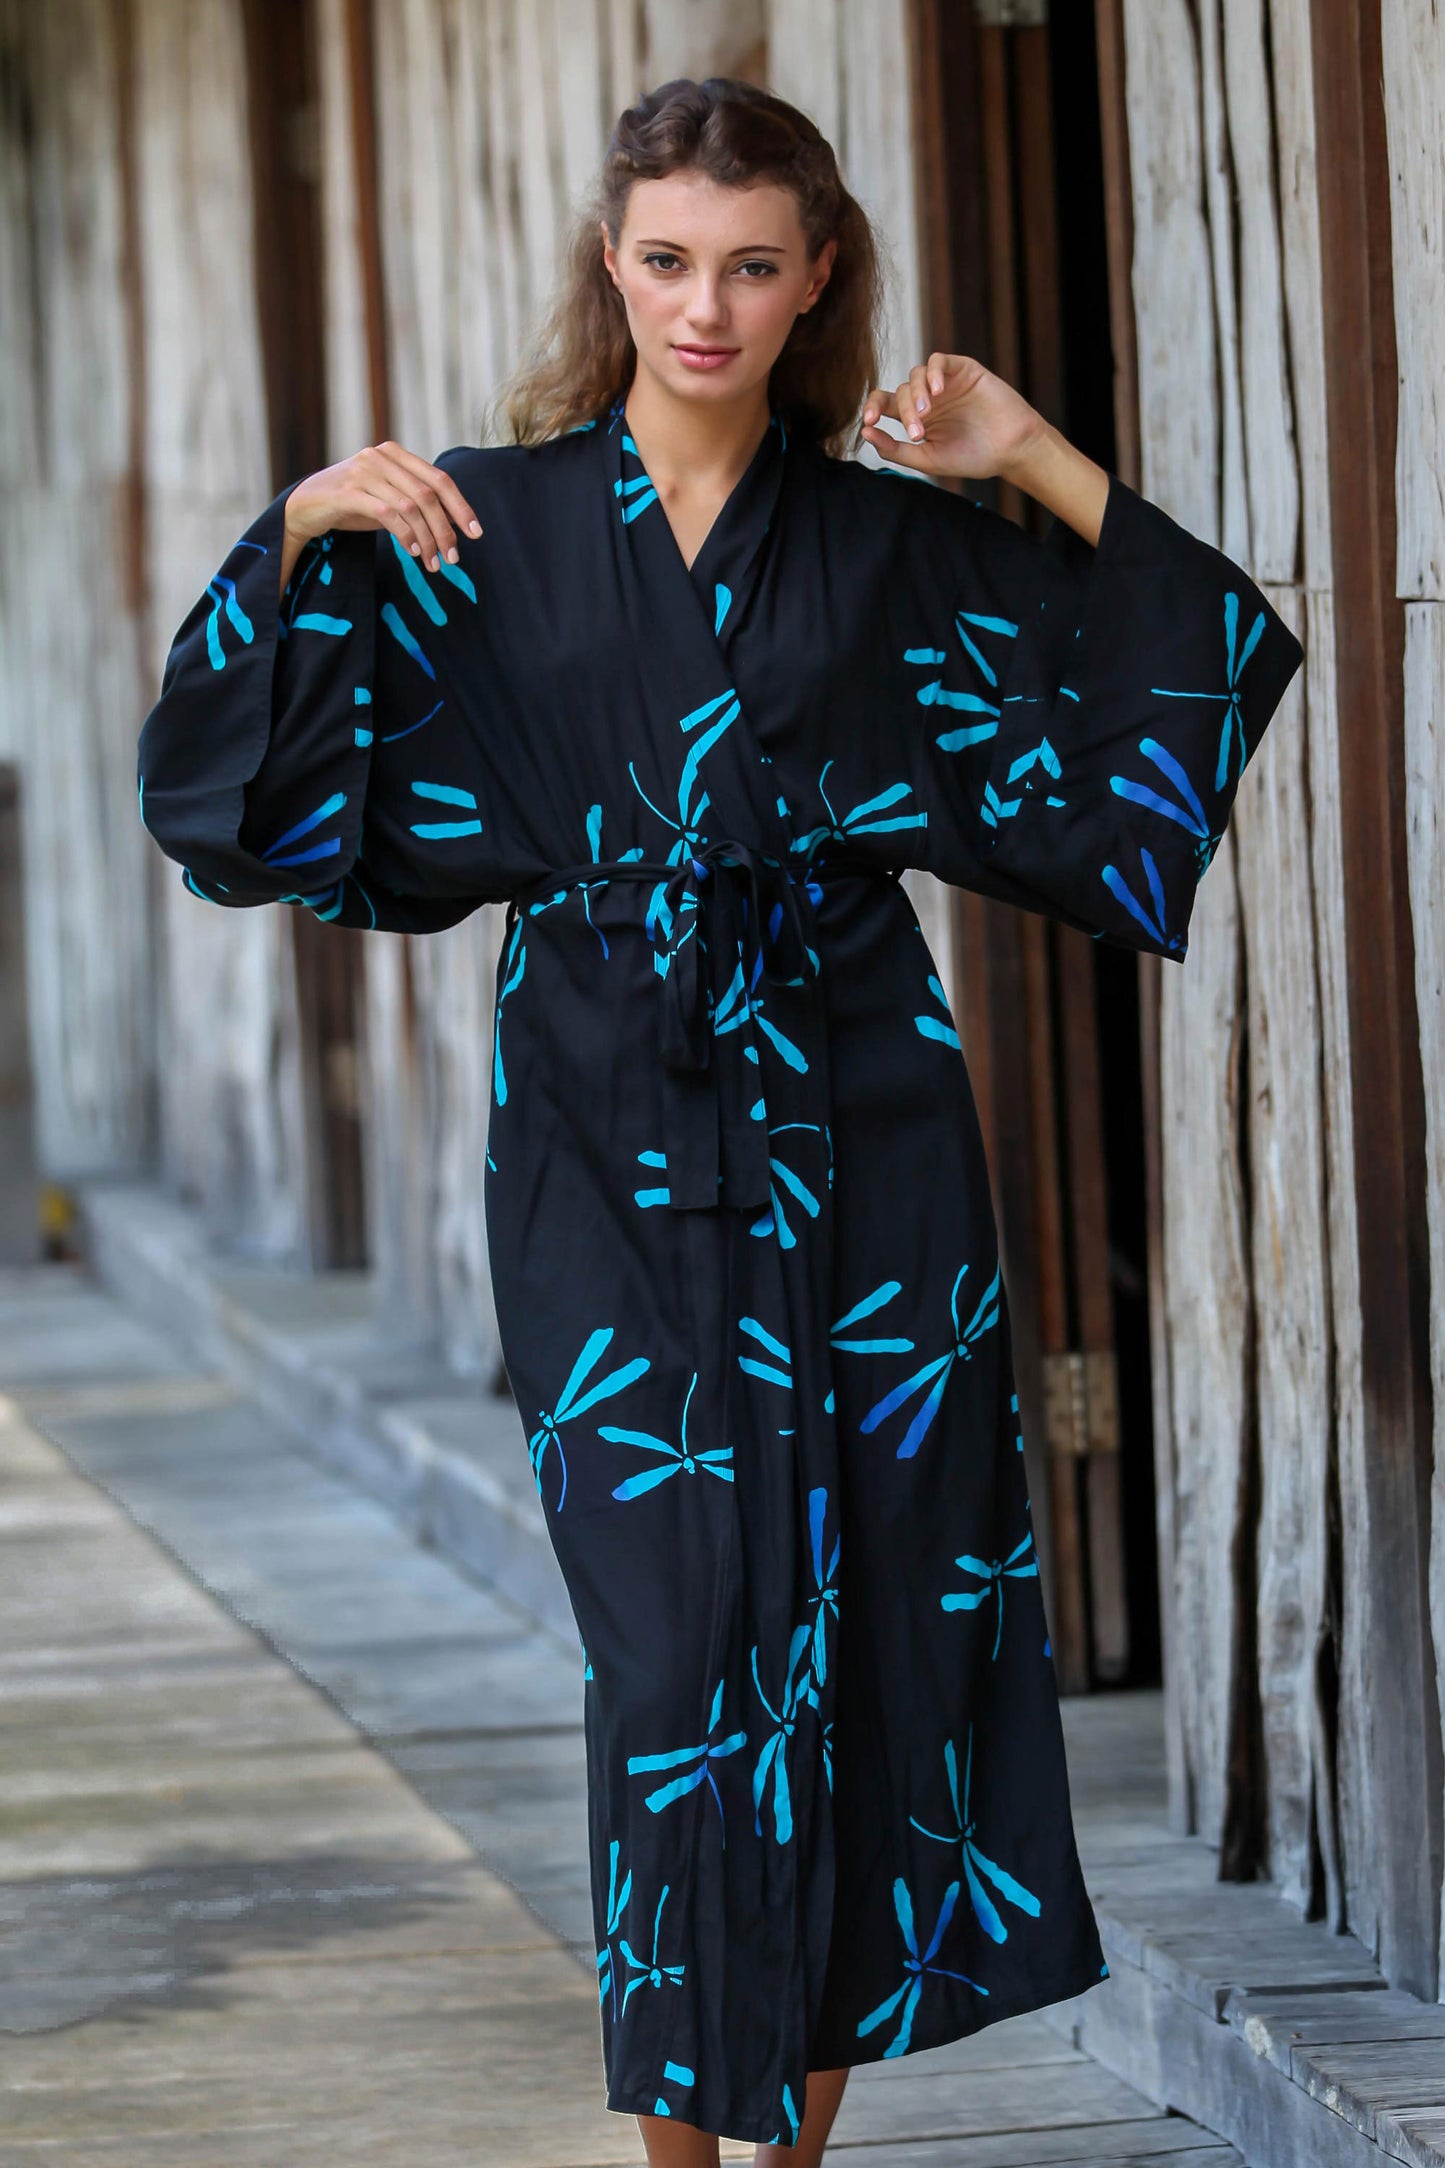 Night Dragonflies Handcrafted Black Batik Robe with Dragonflies from Bali